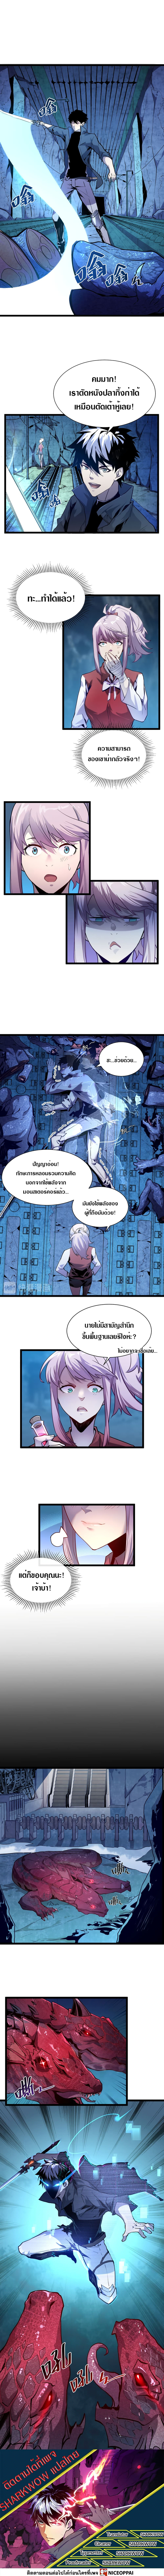 Rise From The Rubble เศษซากวันสิ้นโลก 10-10